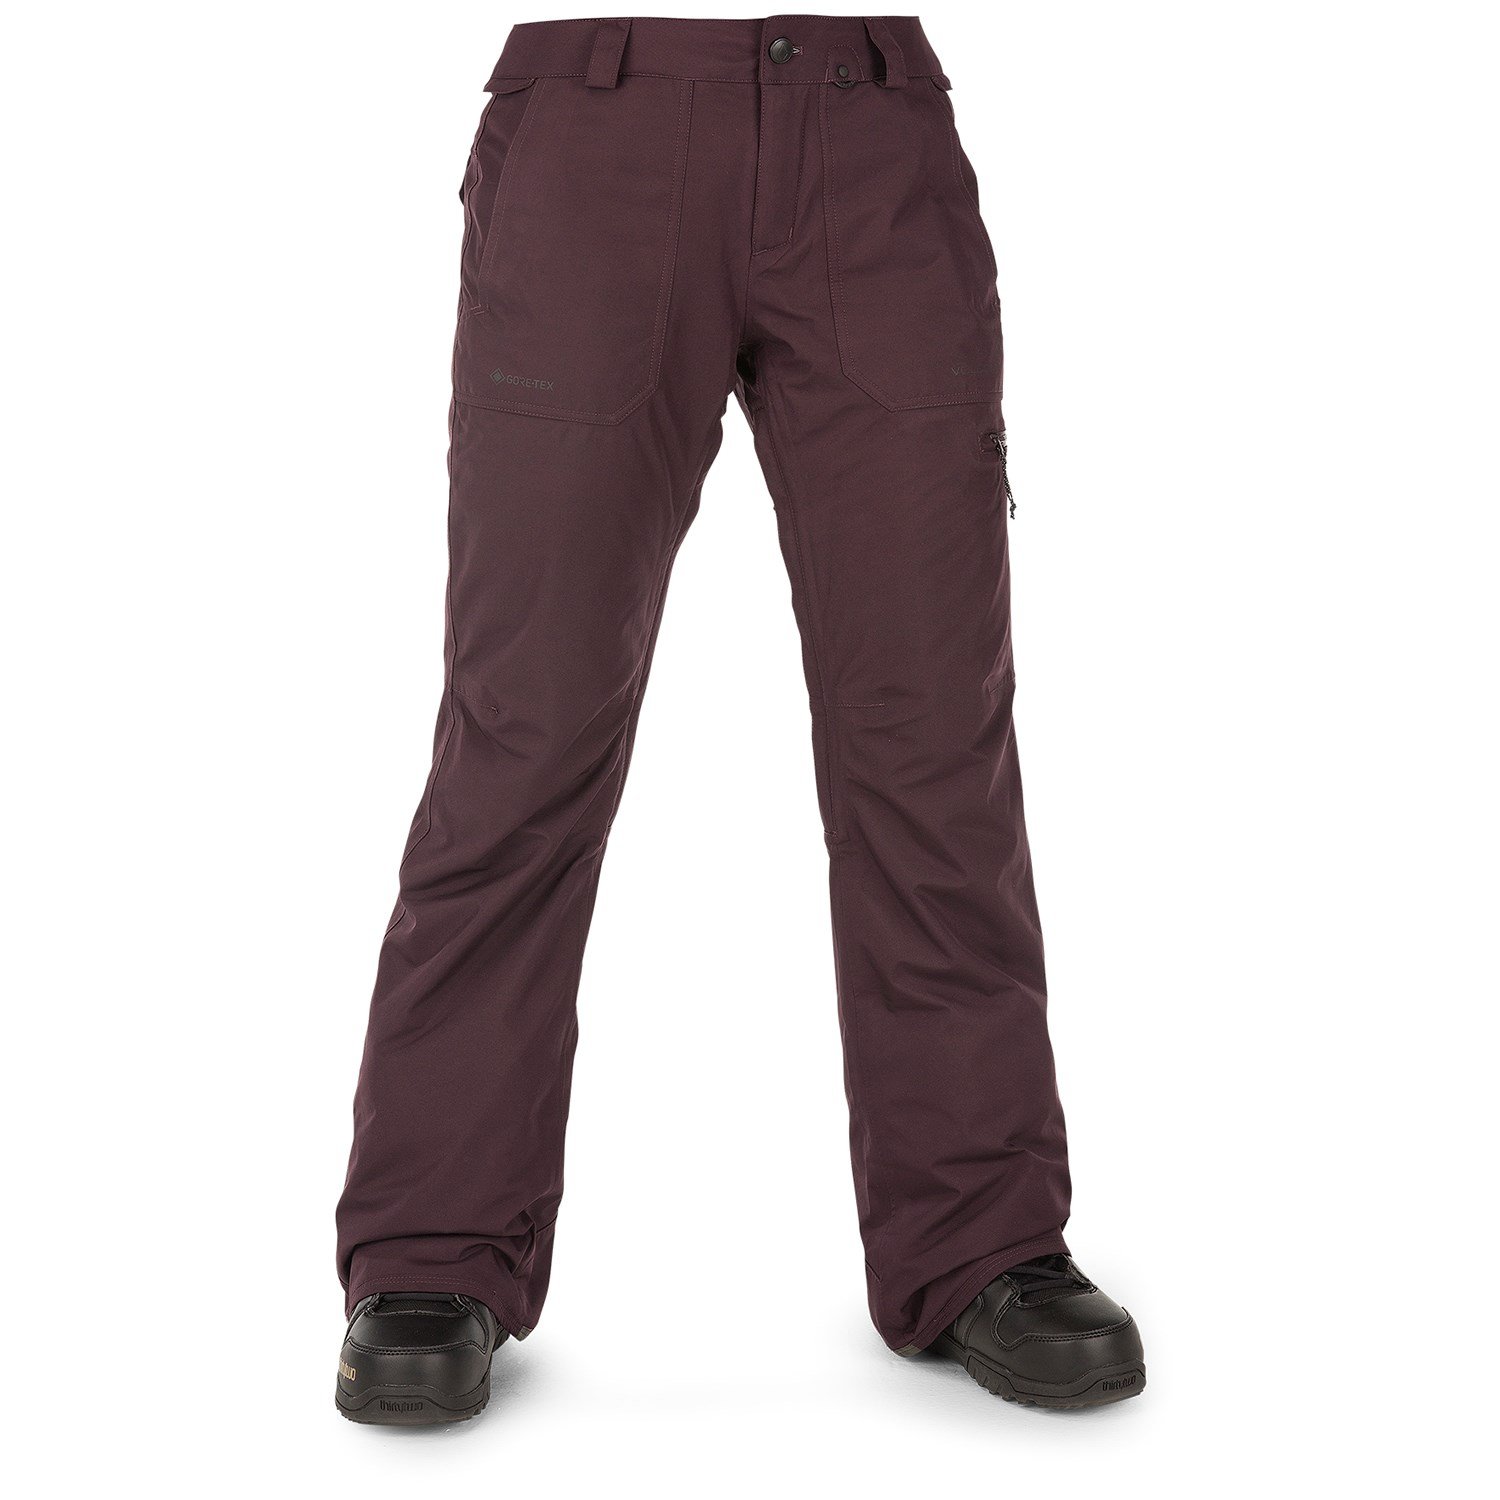 Trego 2L Insulated Pant